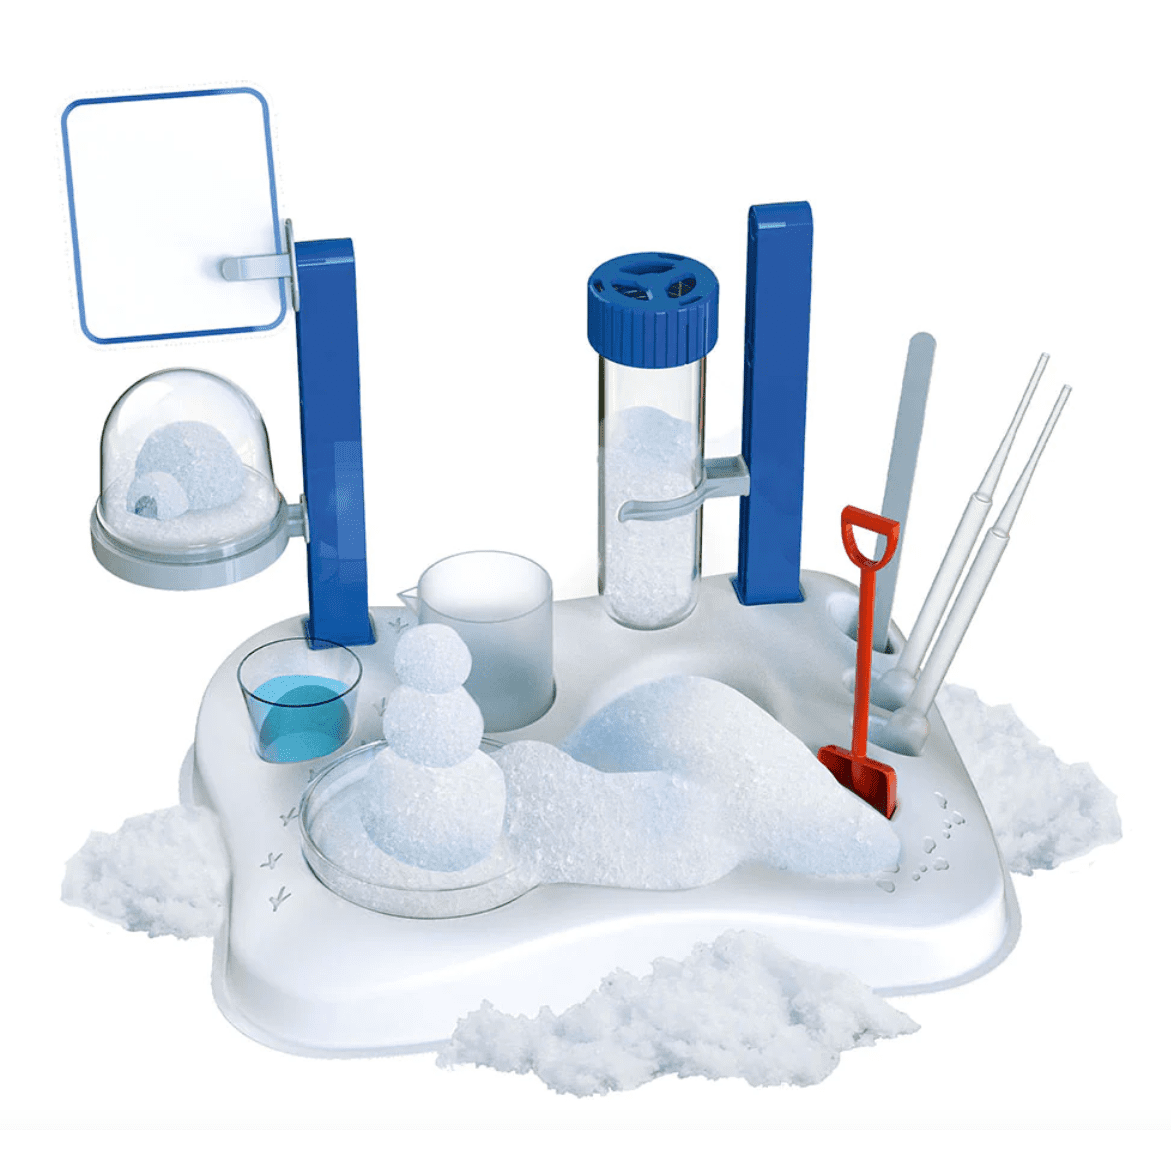 OOZE LABS: INSTANT SNOW STATION - The Toy Book